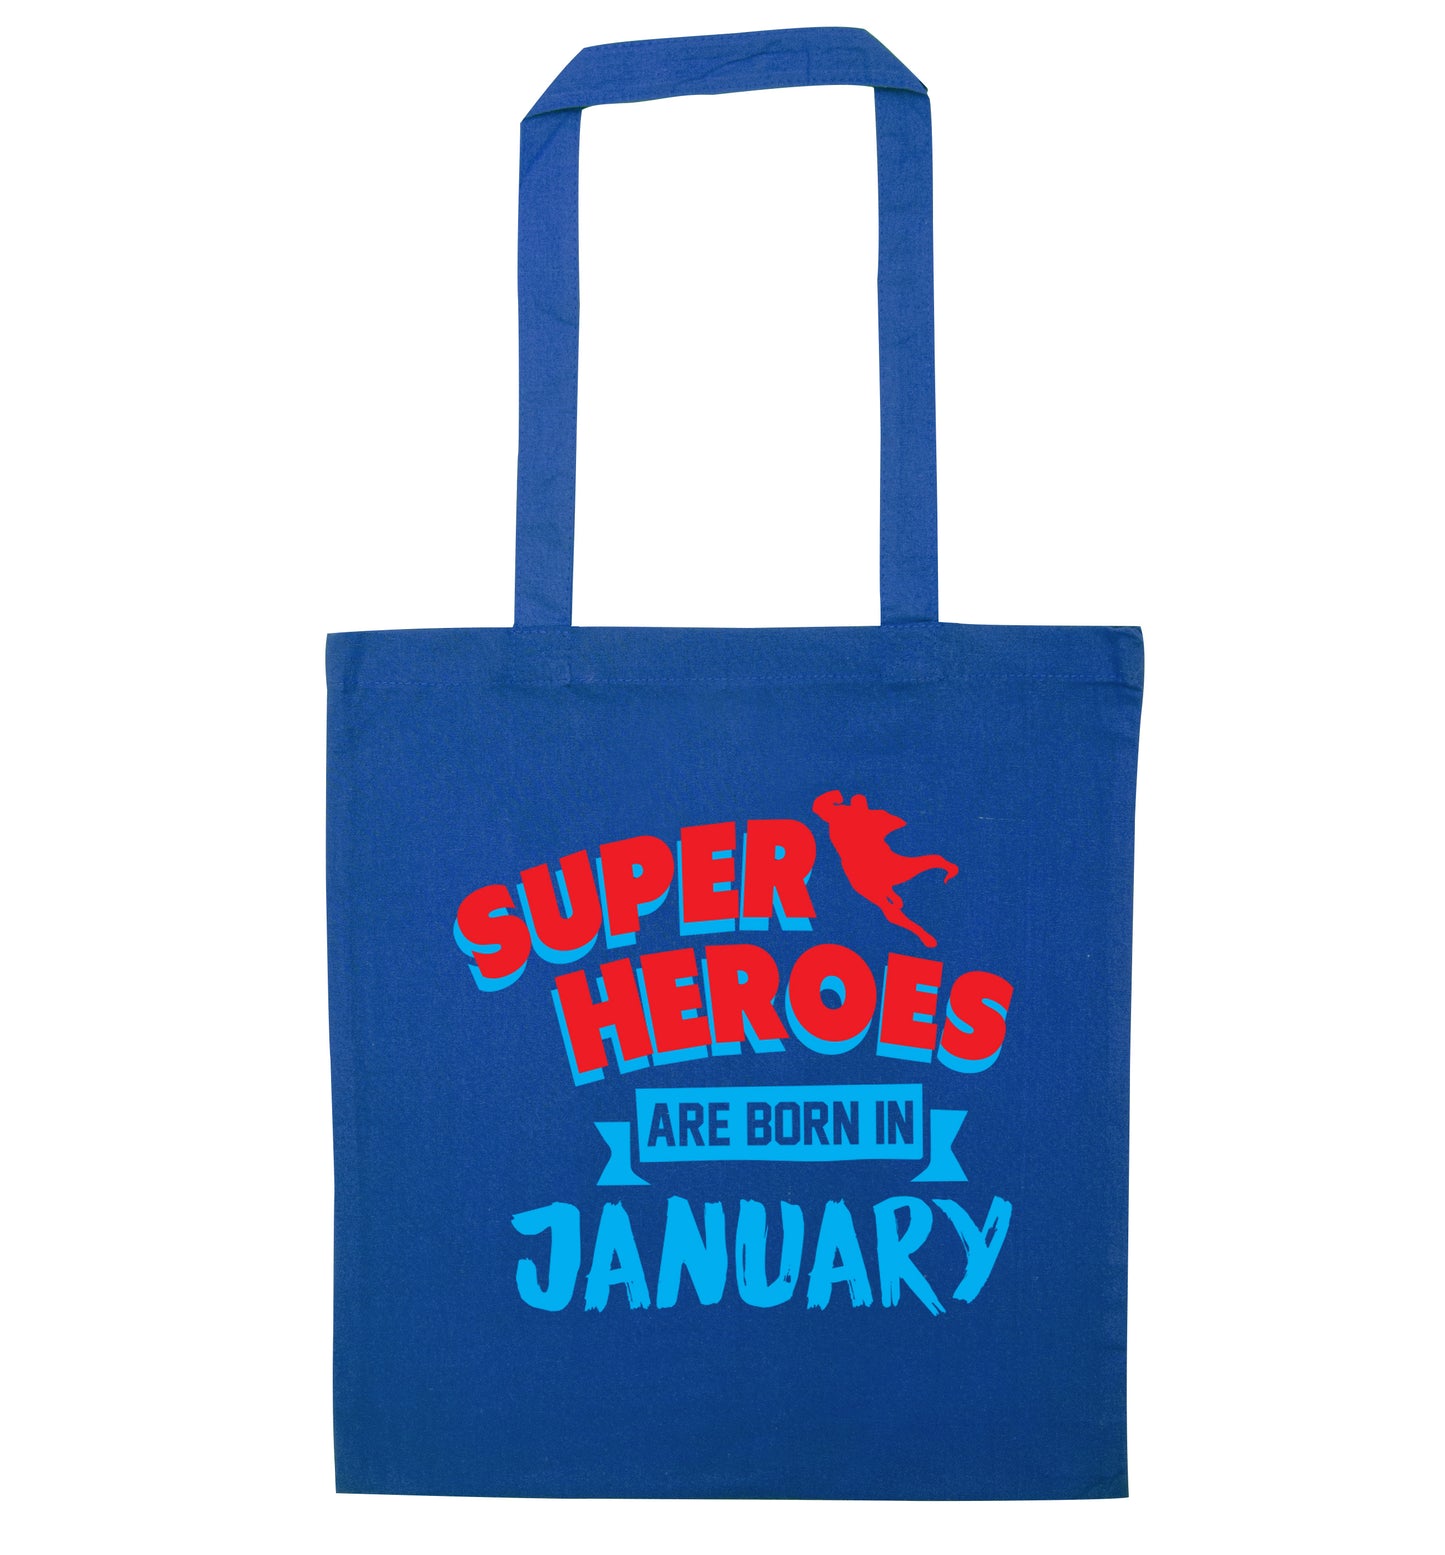 Superheros are born in January blue tote bag